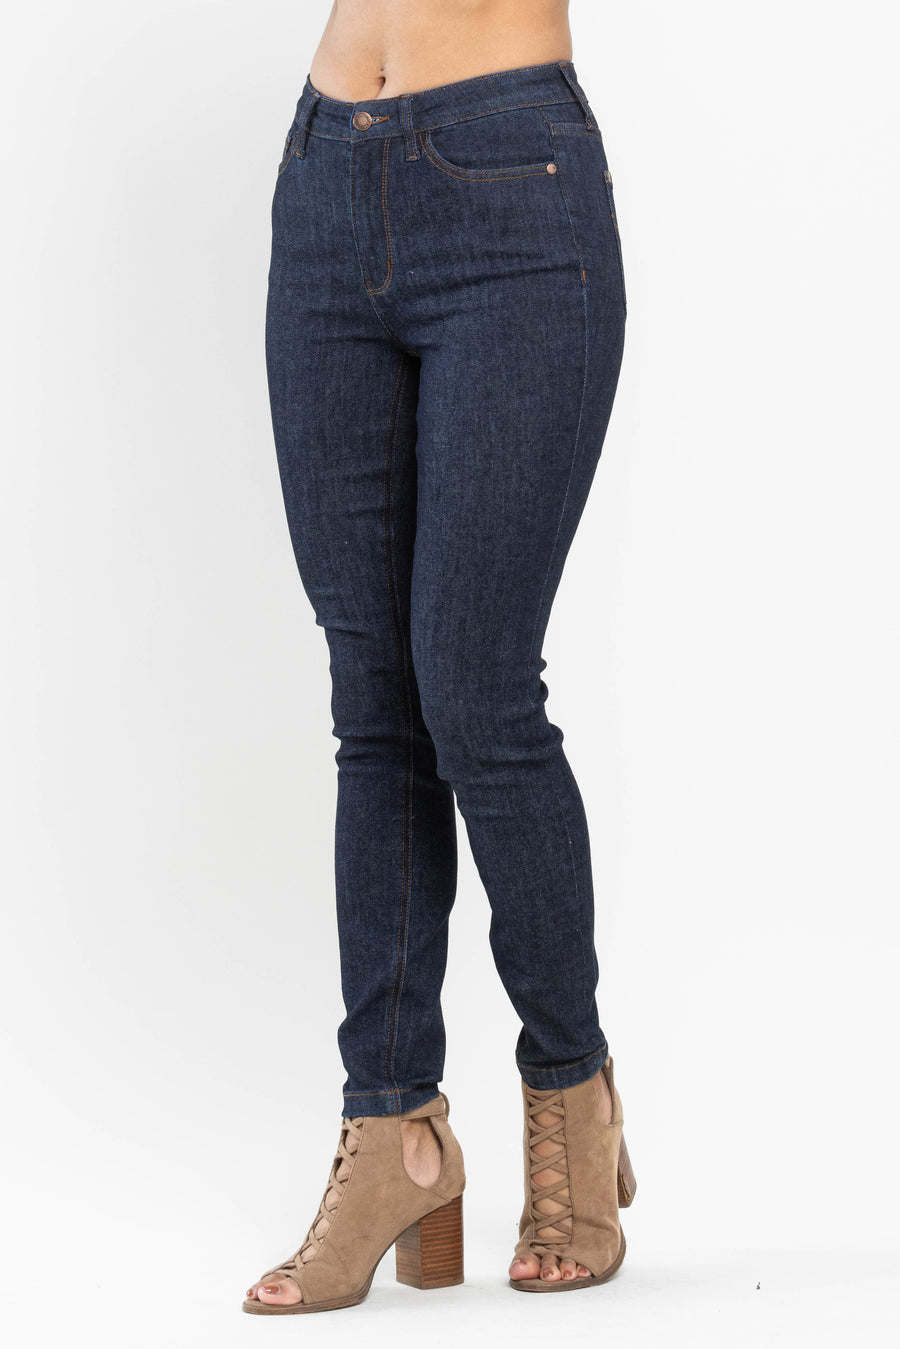 Holly HW Classic Back Pocket Embroidery Skinny